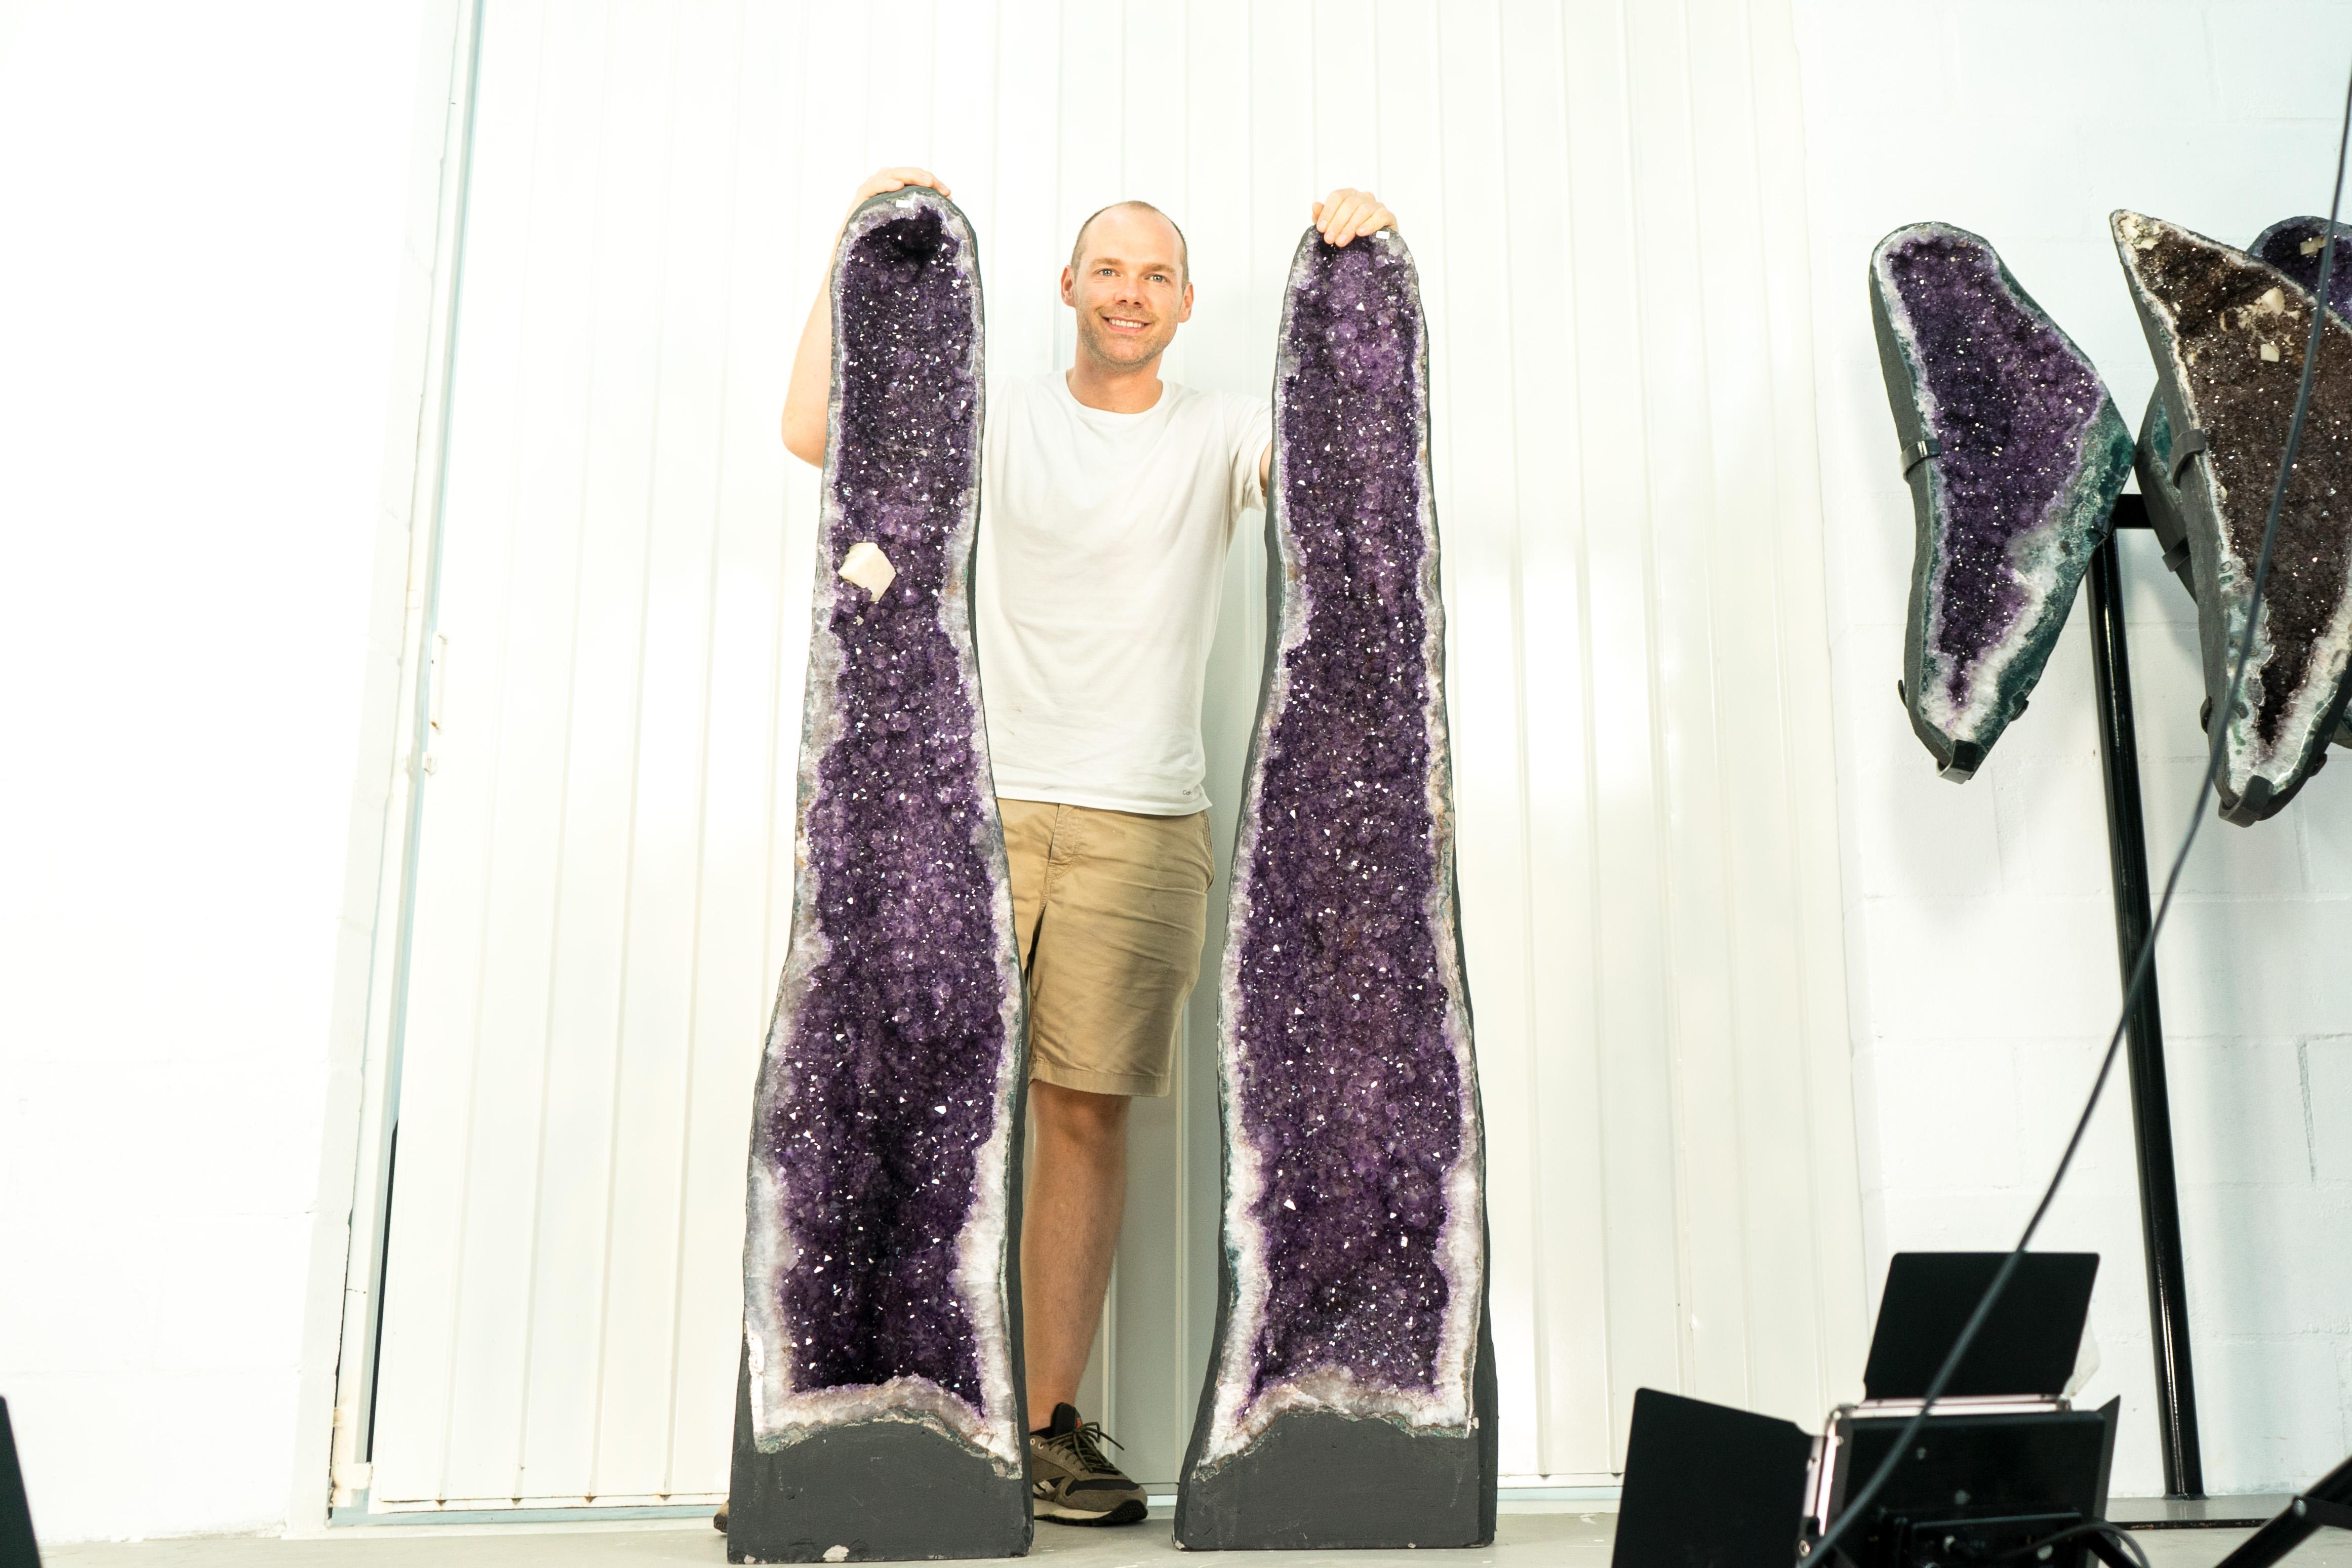 Pair of X-Tall Large Amethyst Geodes, Lavender Purple, Filled with Sparkly Amethyst Druzy

▫️ Description

A book-matched pair of Amethyst Geodes showcases gorgeous characteristics such as their beautiful aesthetics, shiny druzy surfaces, vibrant